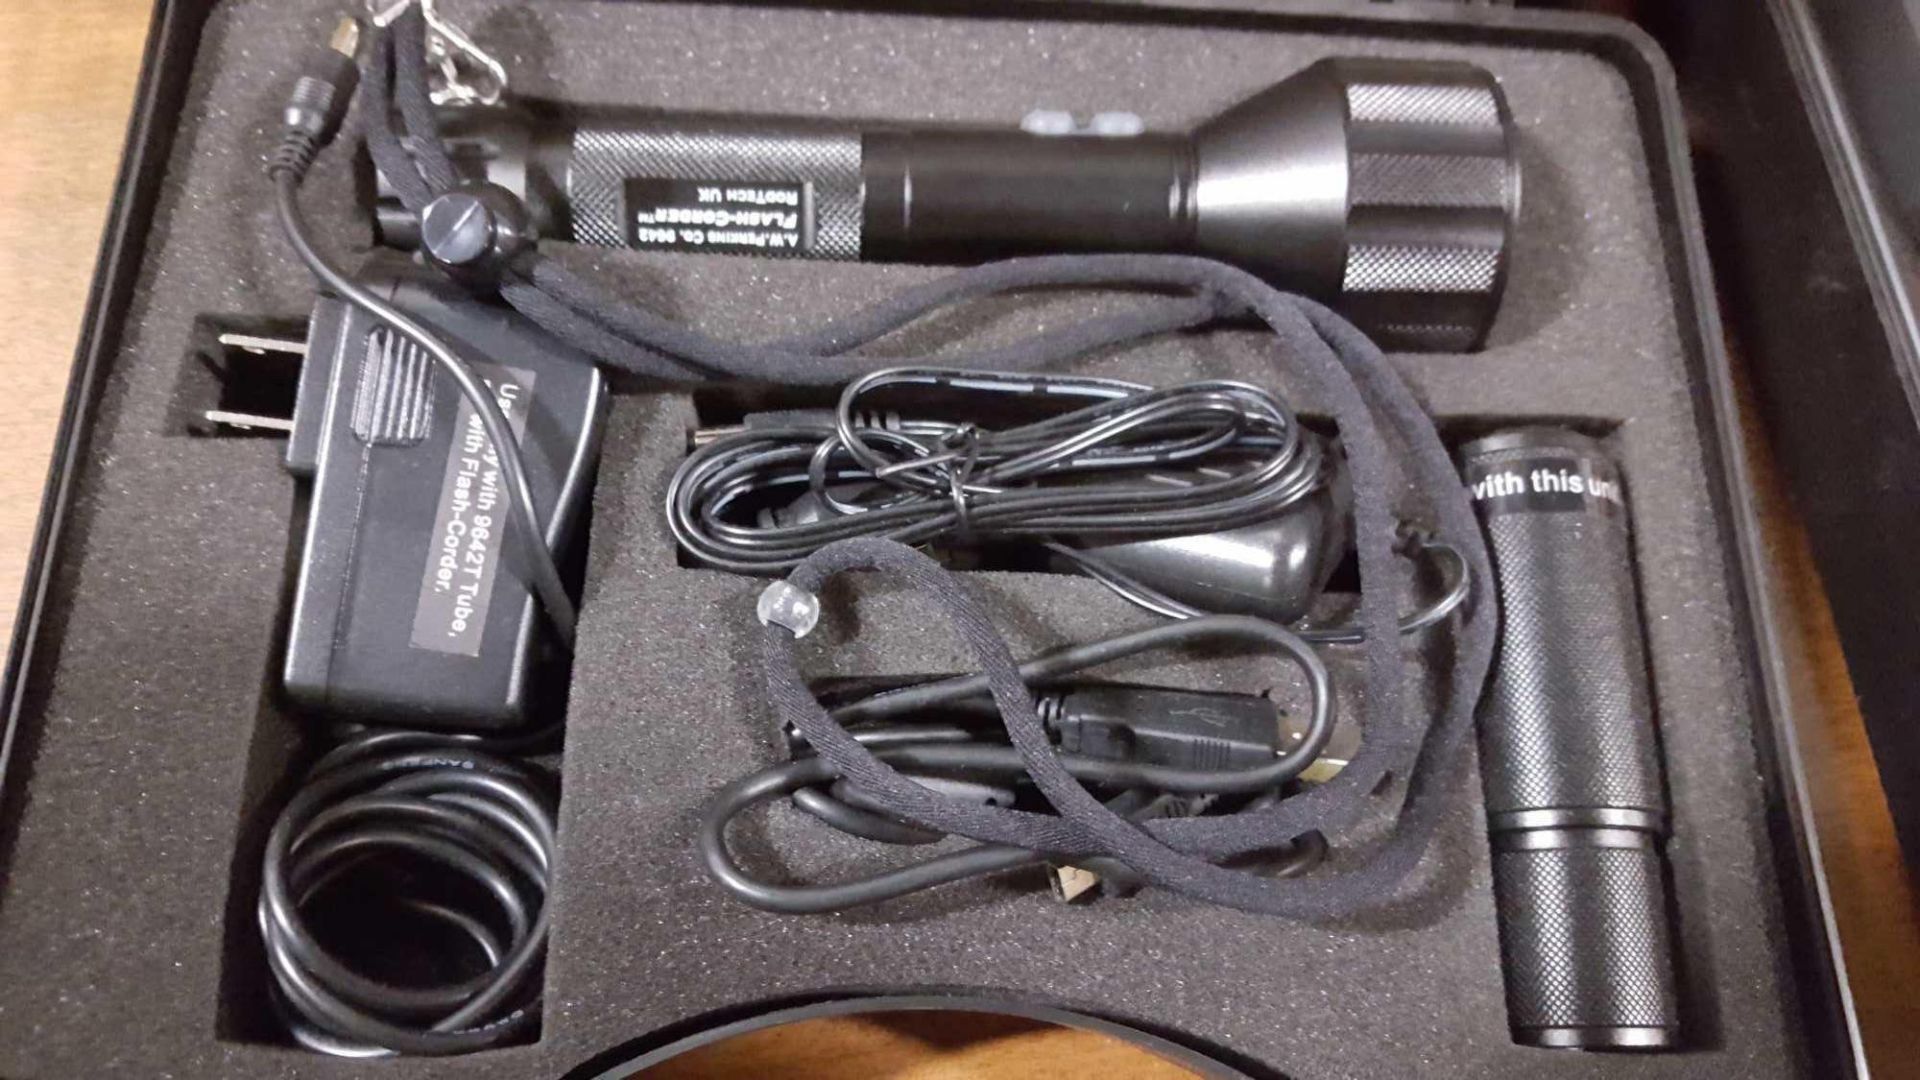 A W Perkins flash corder, M/M 9642, with Perkins flash corder holder, M/N 9642H. - Image 2 of 2